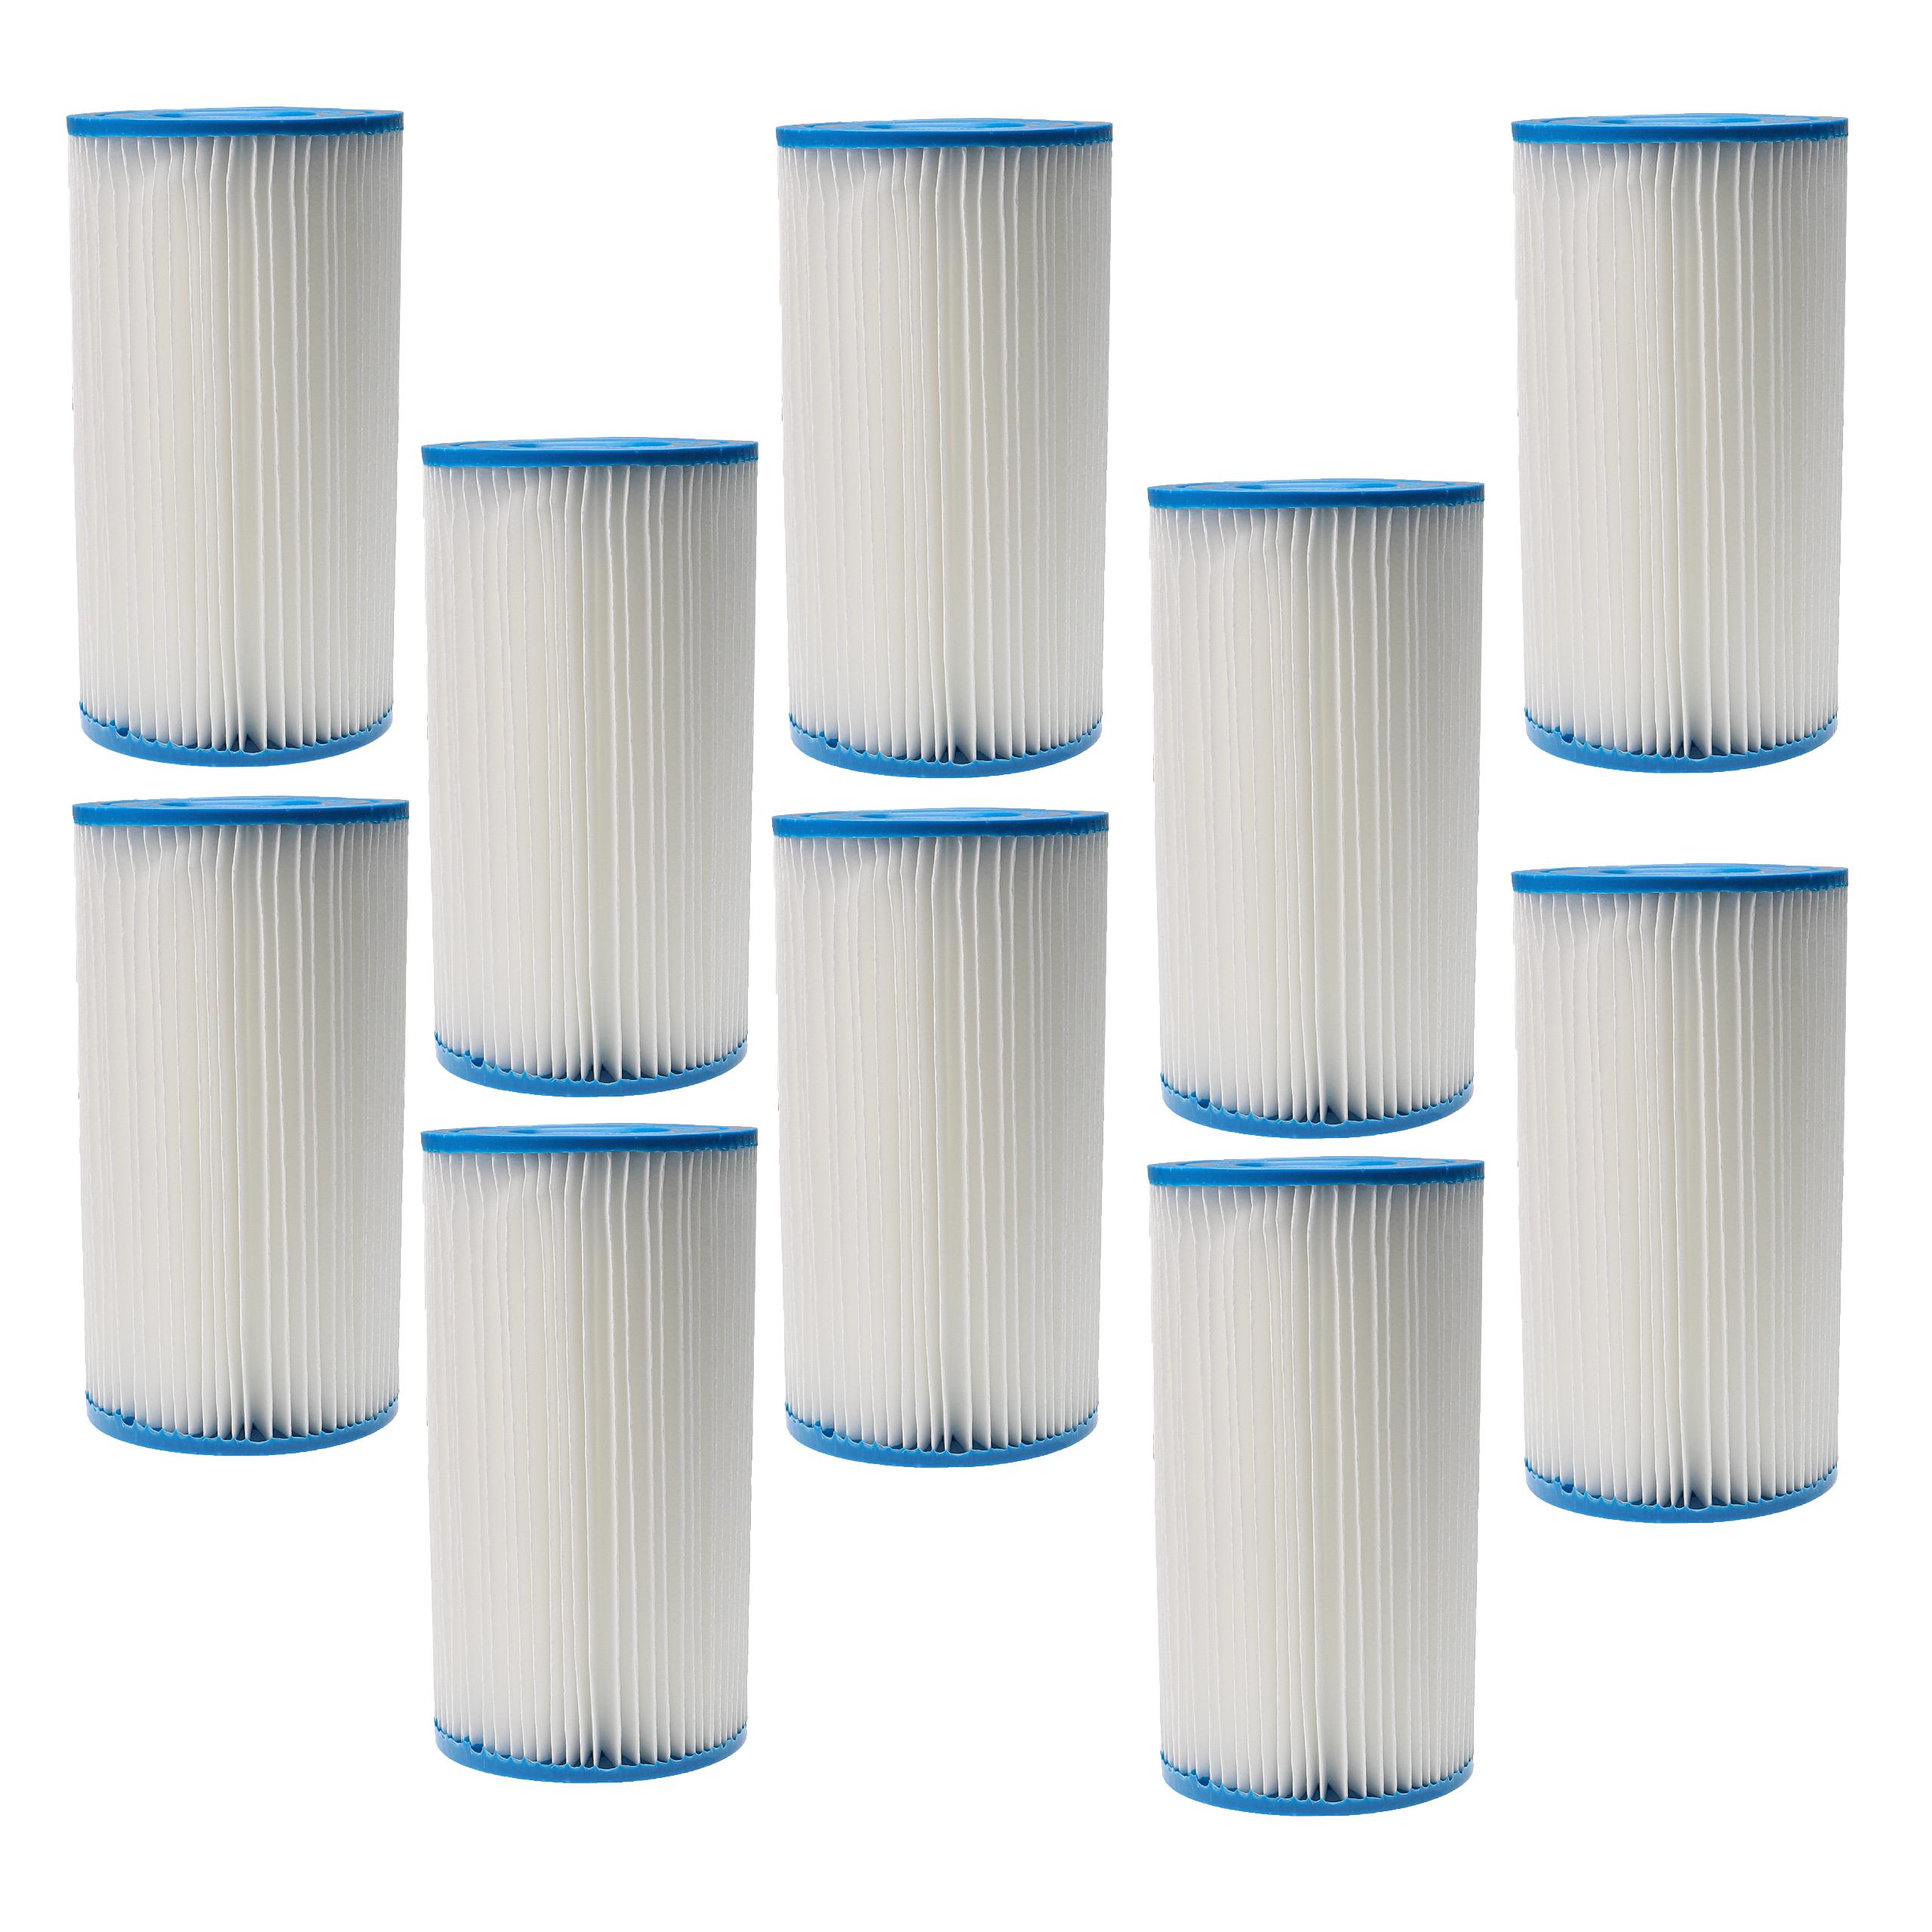  10x Filter Cartridge replaces Intex filter type A for Intex Swimming Pool, Filter Pump - Blue White